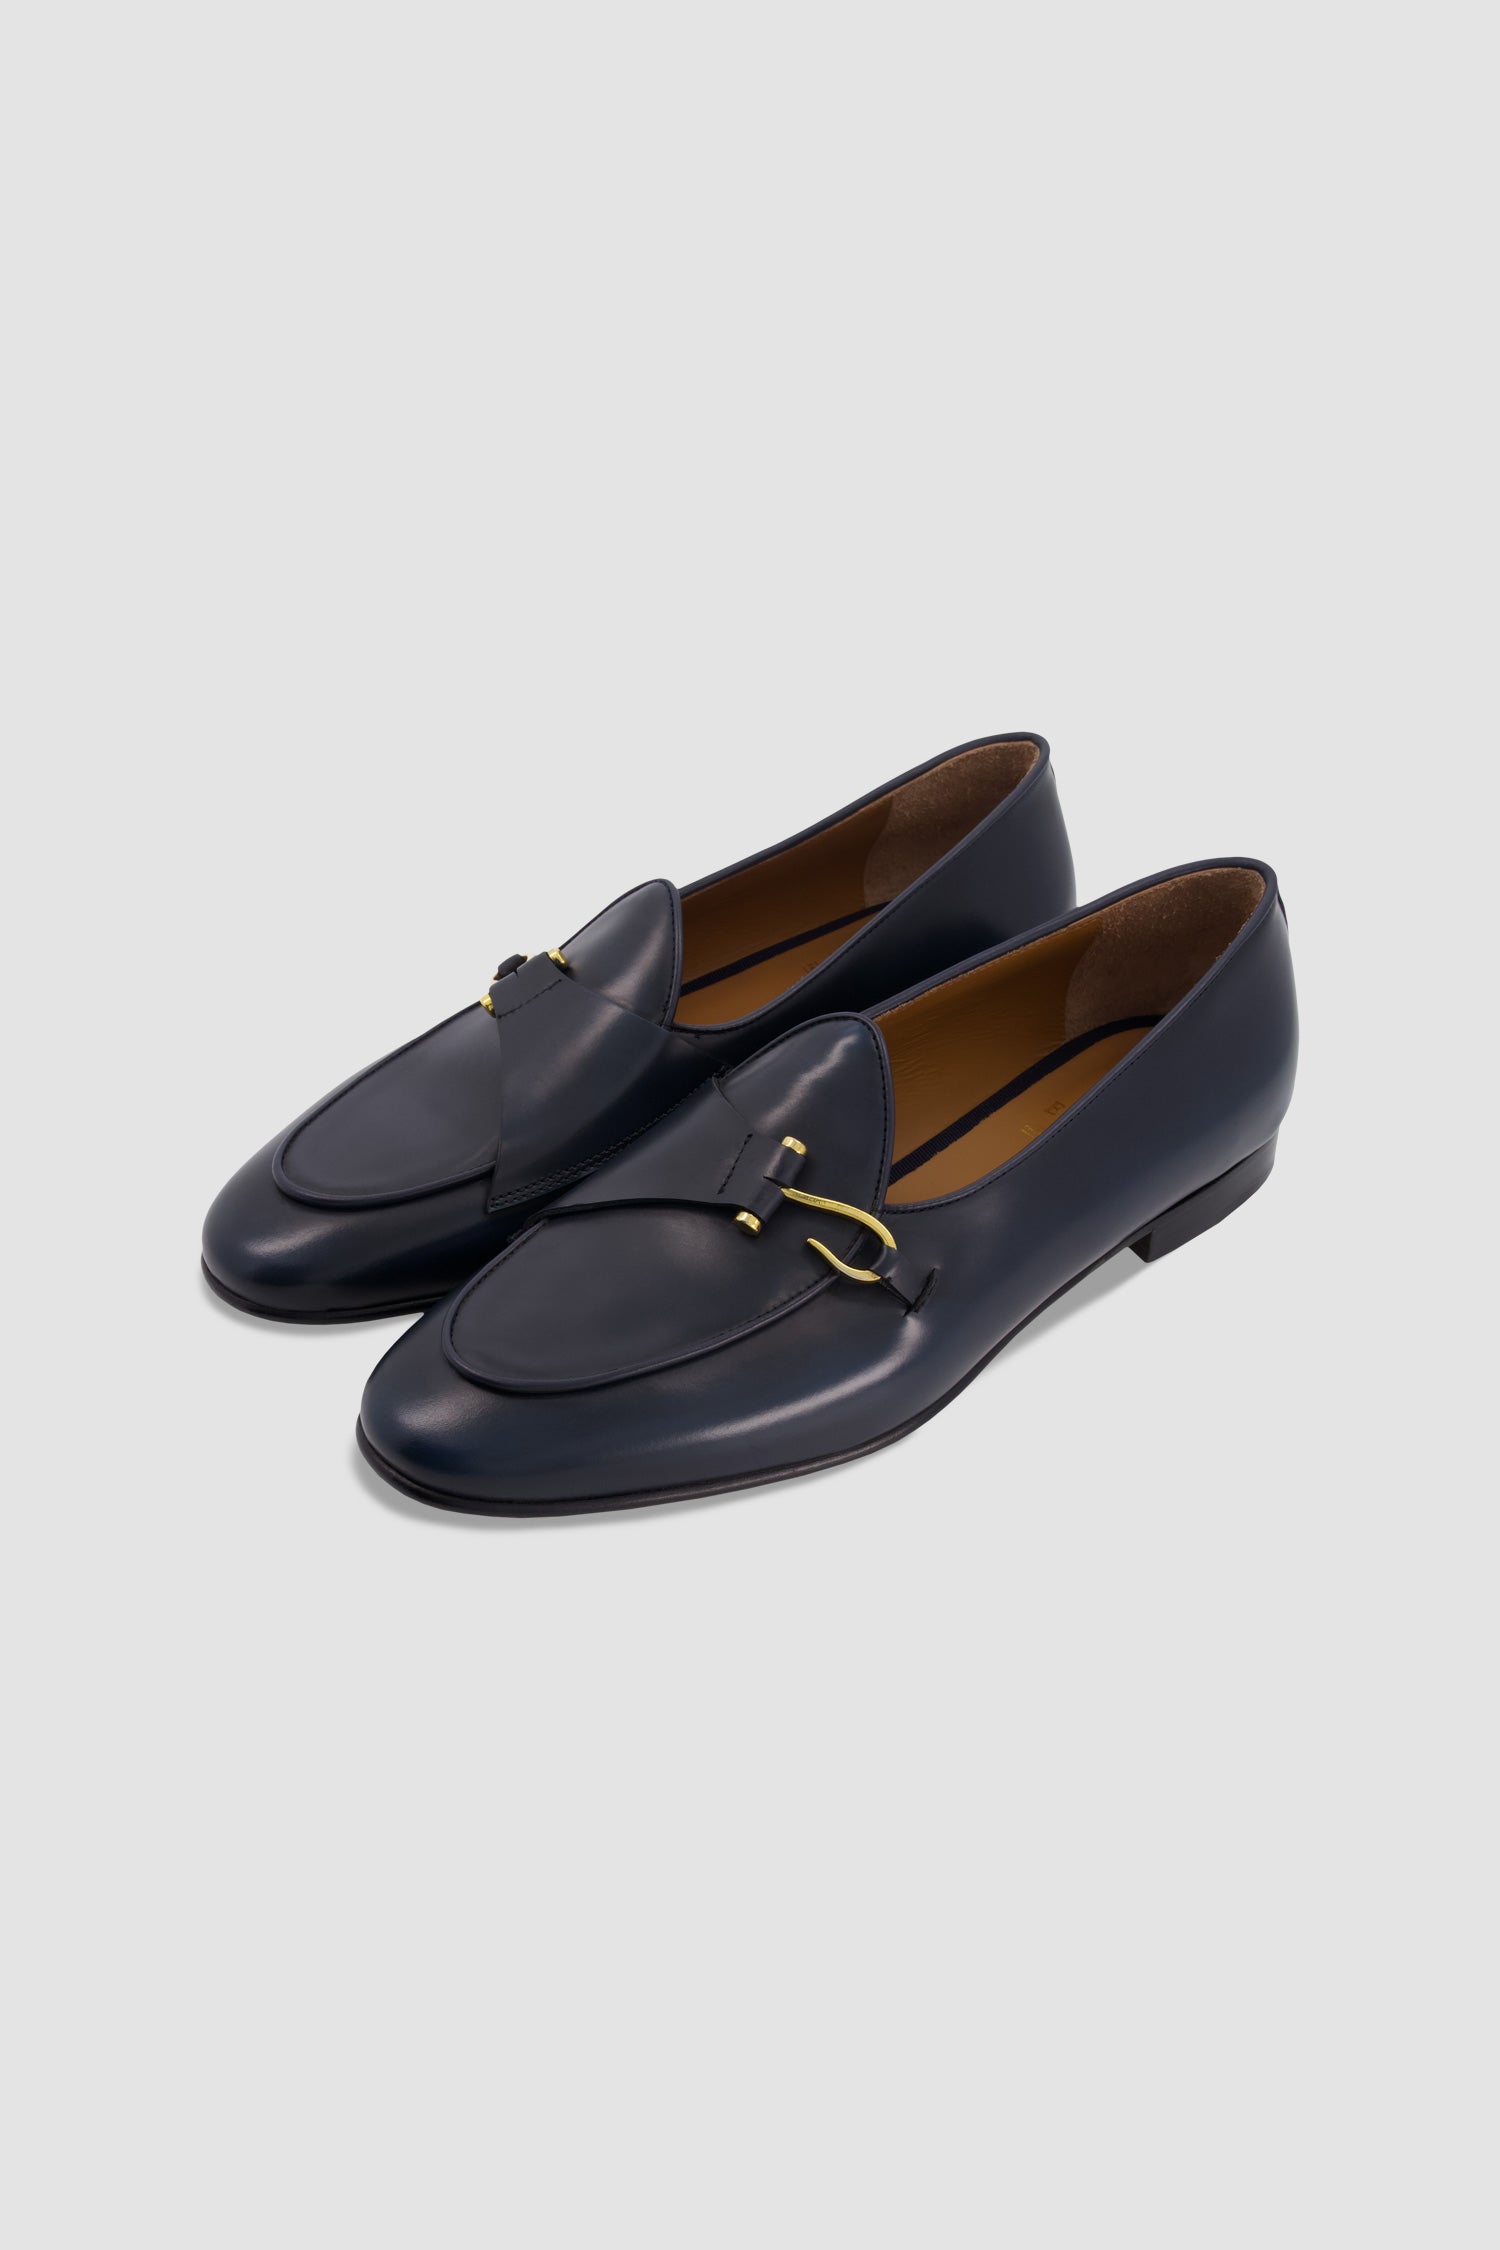 Edhen Milano Comporta leather loafers - Black